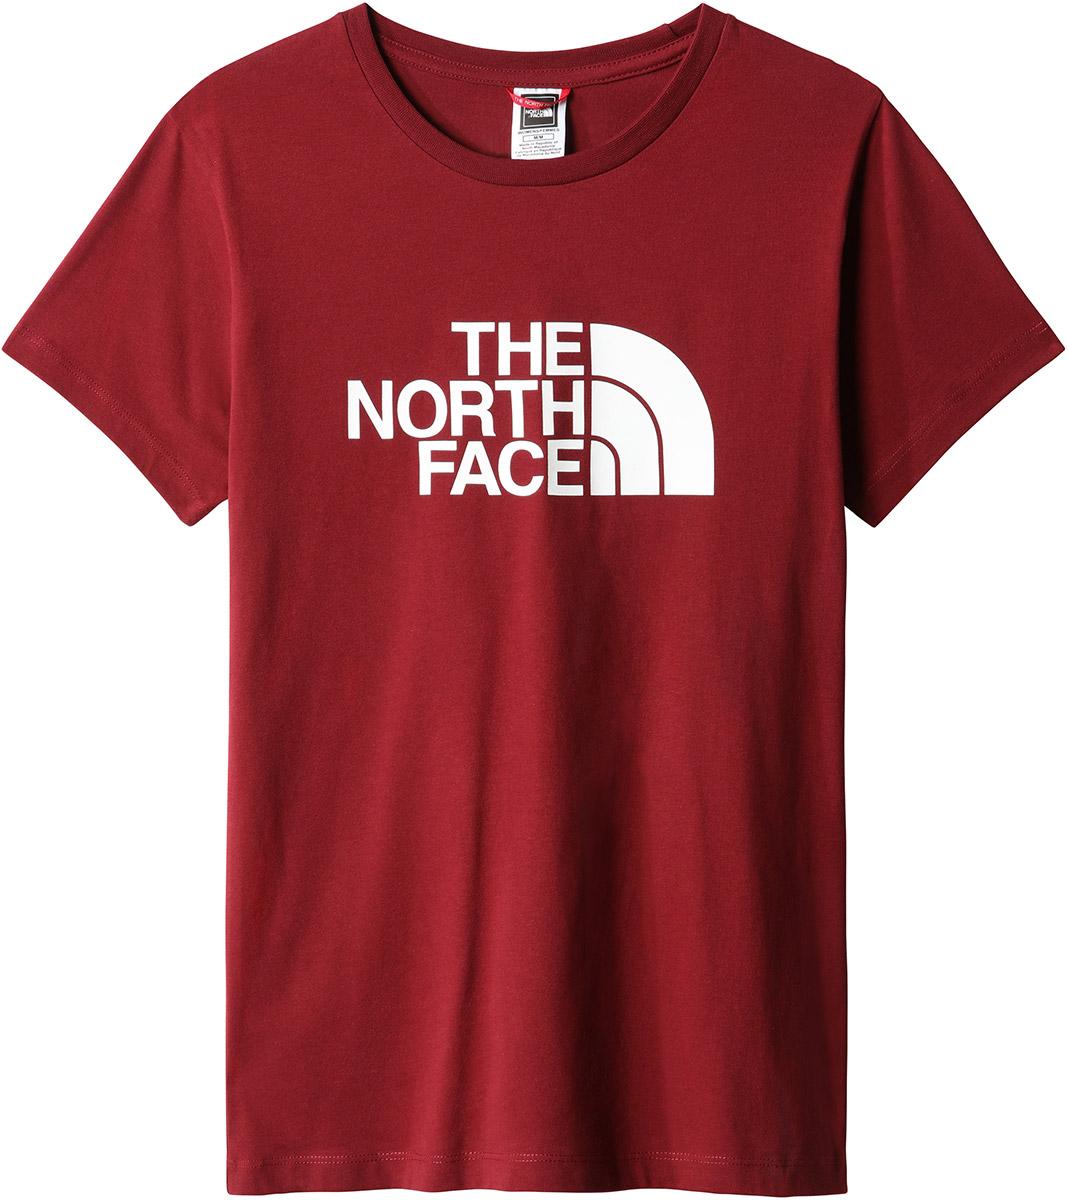 The North Face Womens Easy Tee - Cordovan